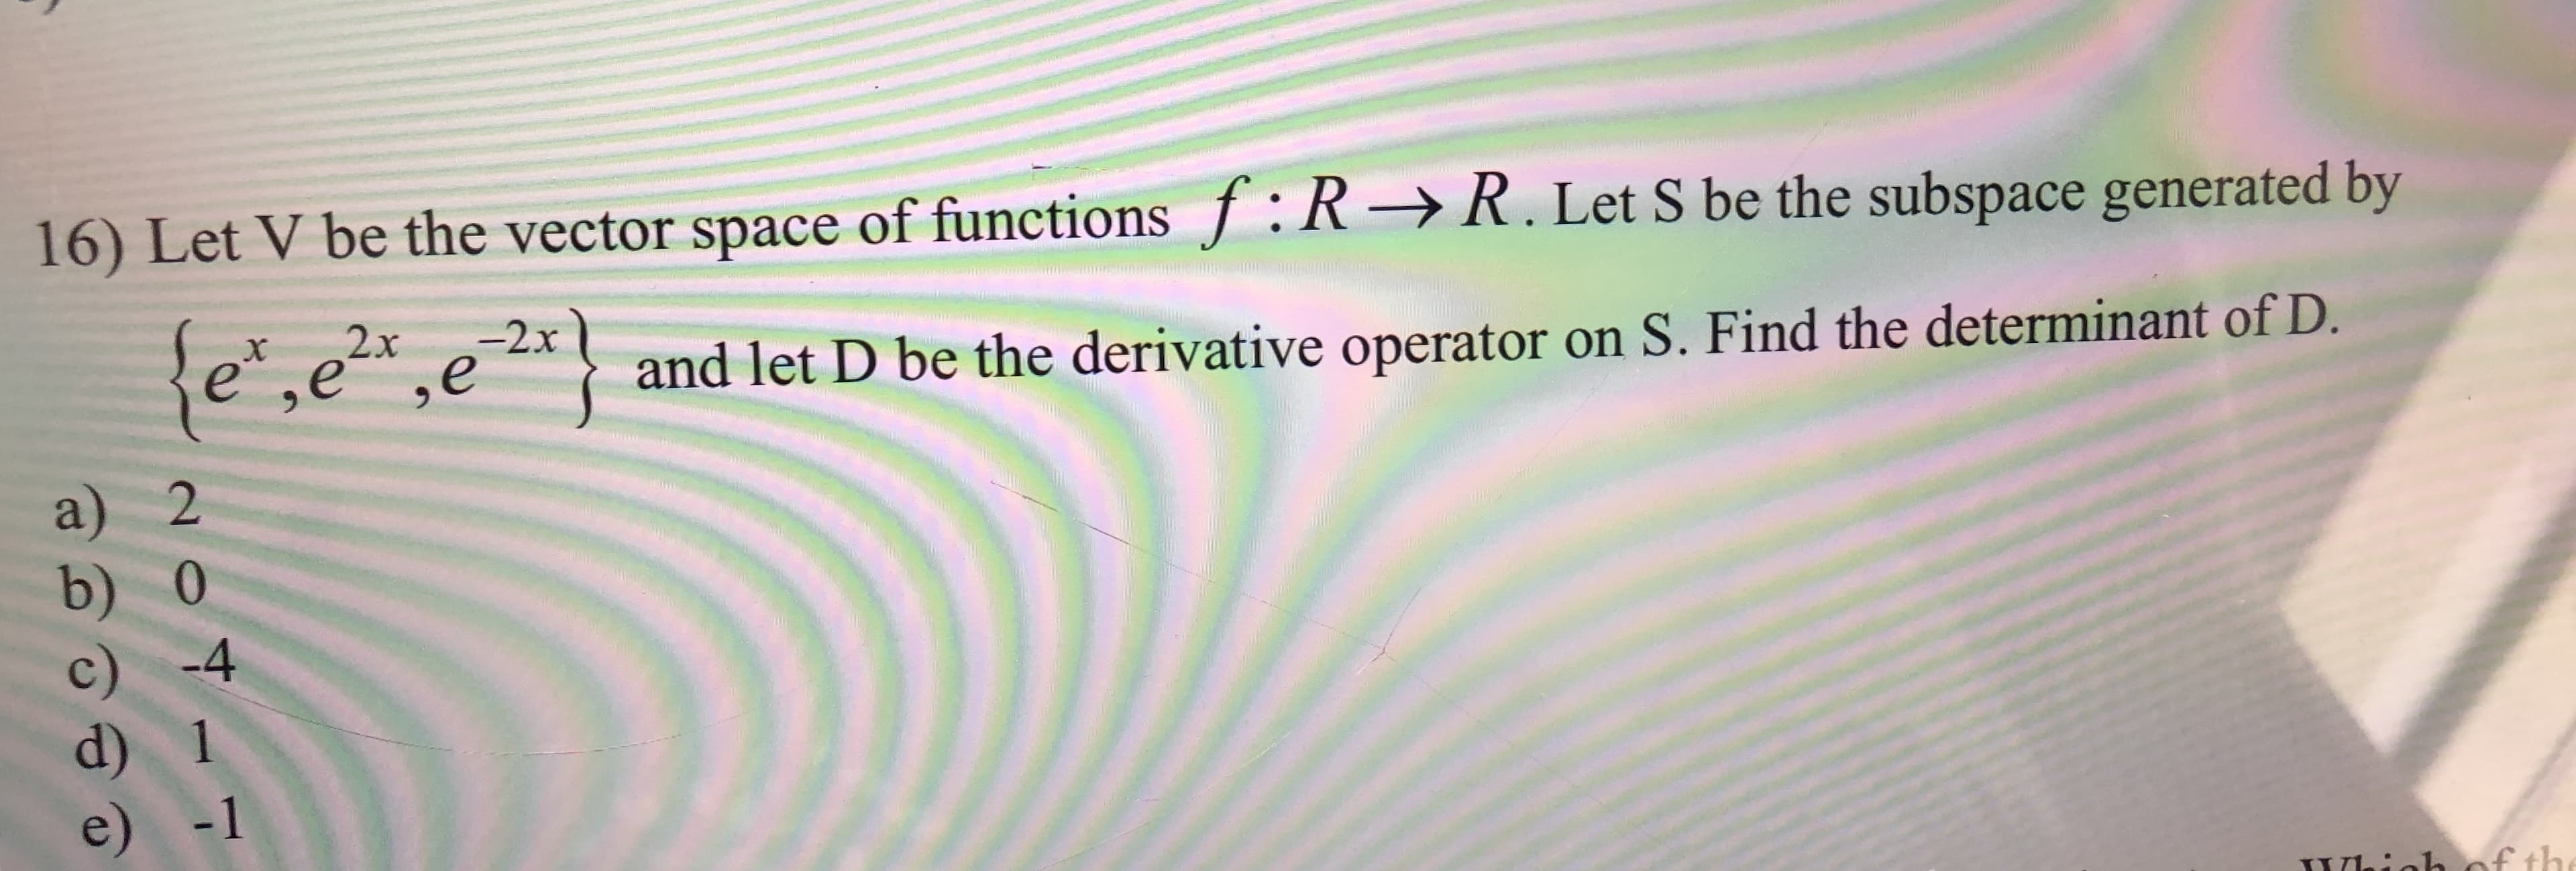 16) Let V be the vector space of functionsf:R
R.Let S be the subspace generated by
fe,e,
2x
-2x
X
and let D be the derivative operator on S. Find the determinant of D.
a) 2
b) 0
c) -4
d) 1
e) -1
